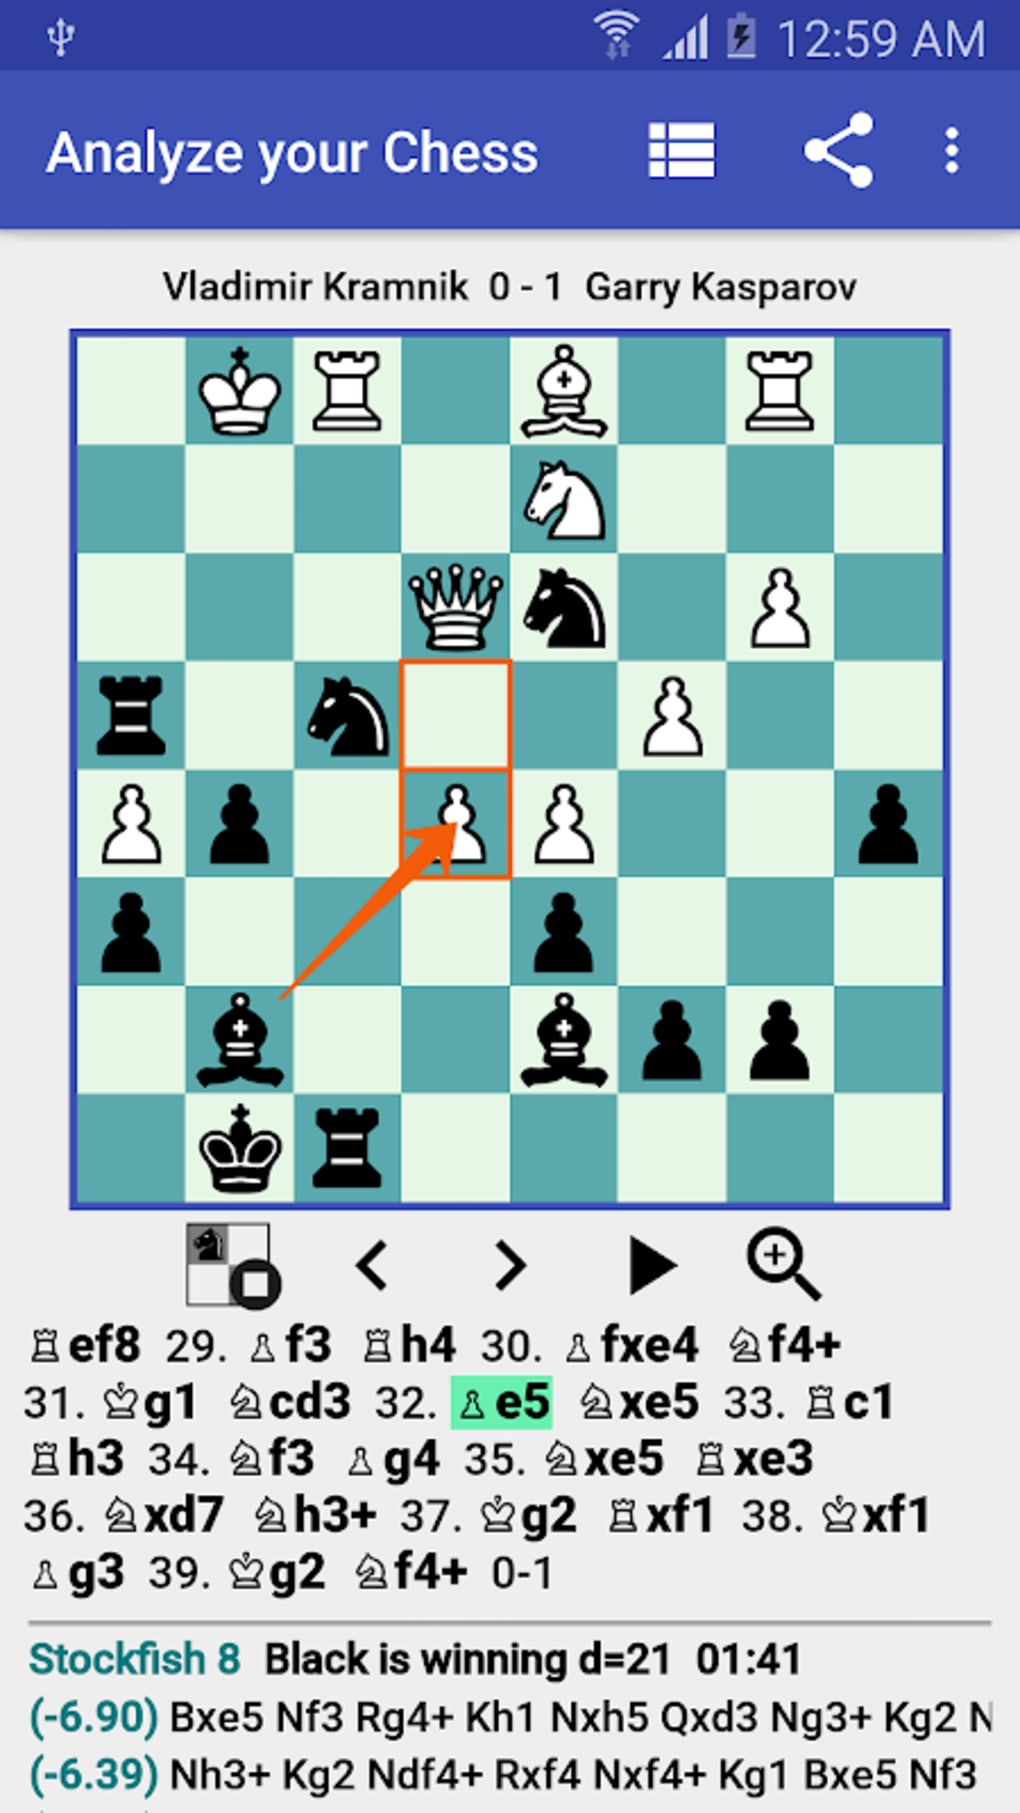 Analyze your Chess - PGN Viewer APK for Android - Download